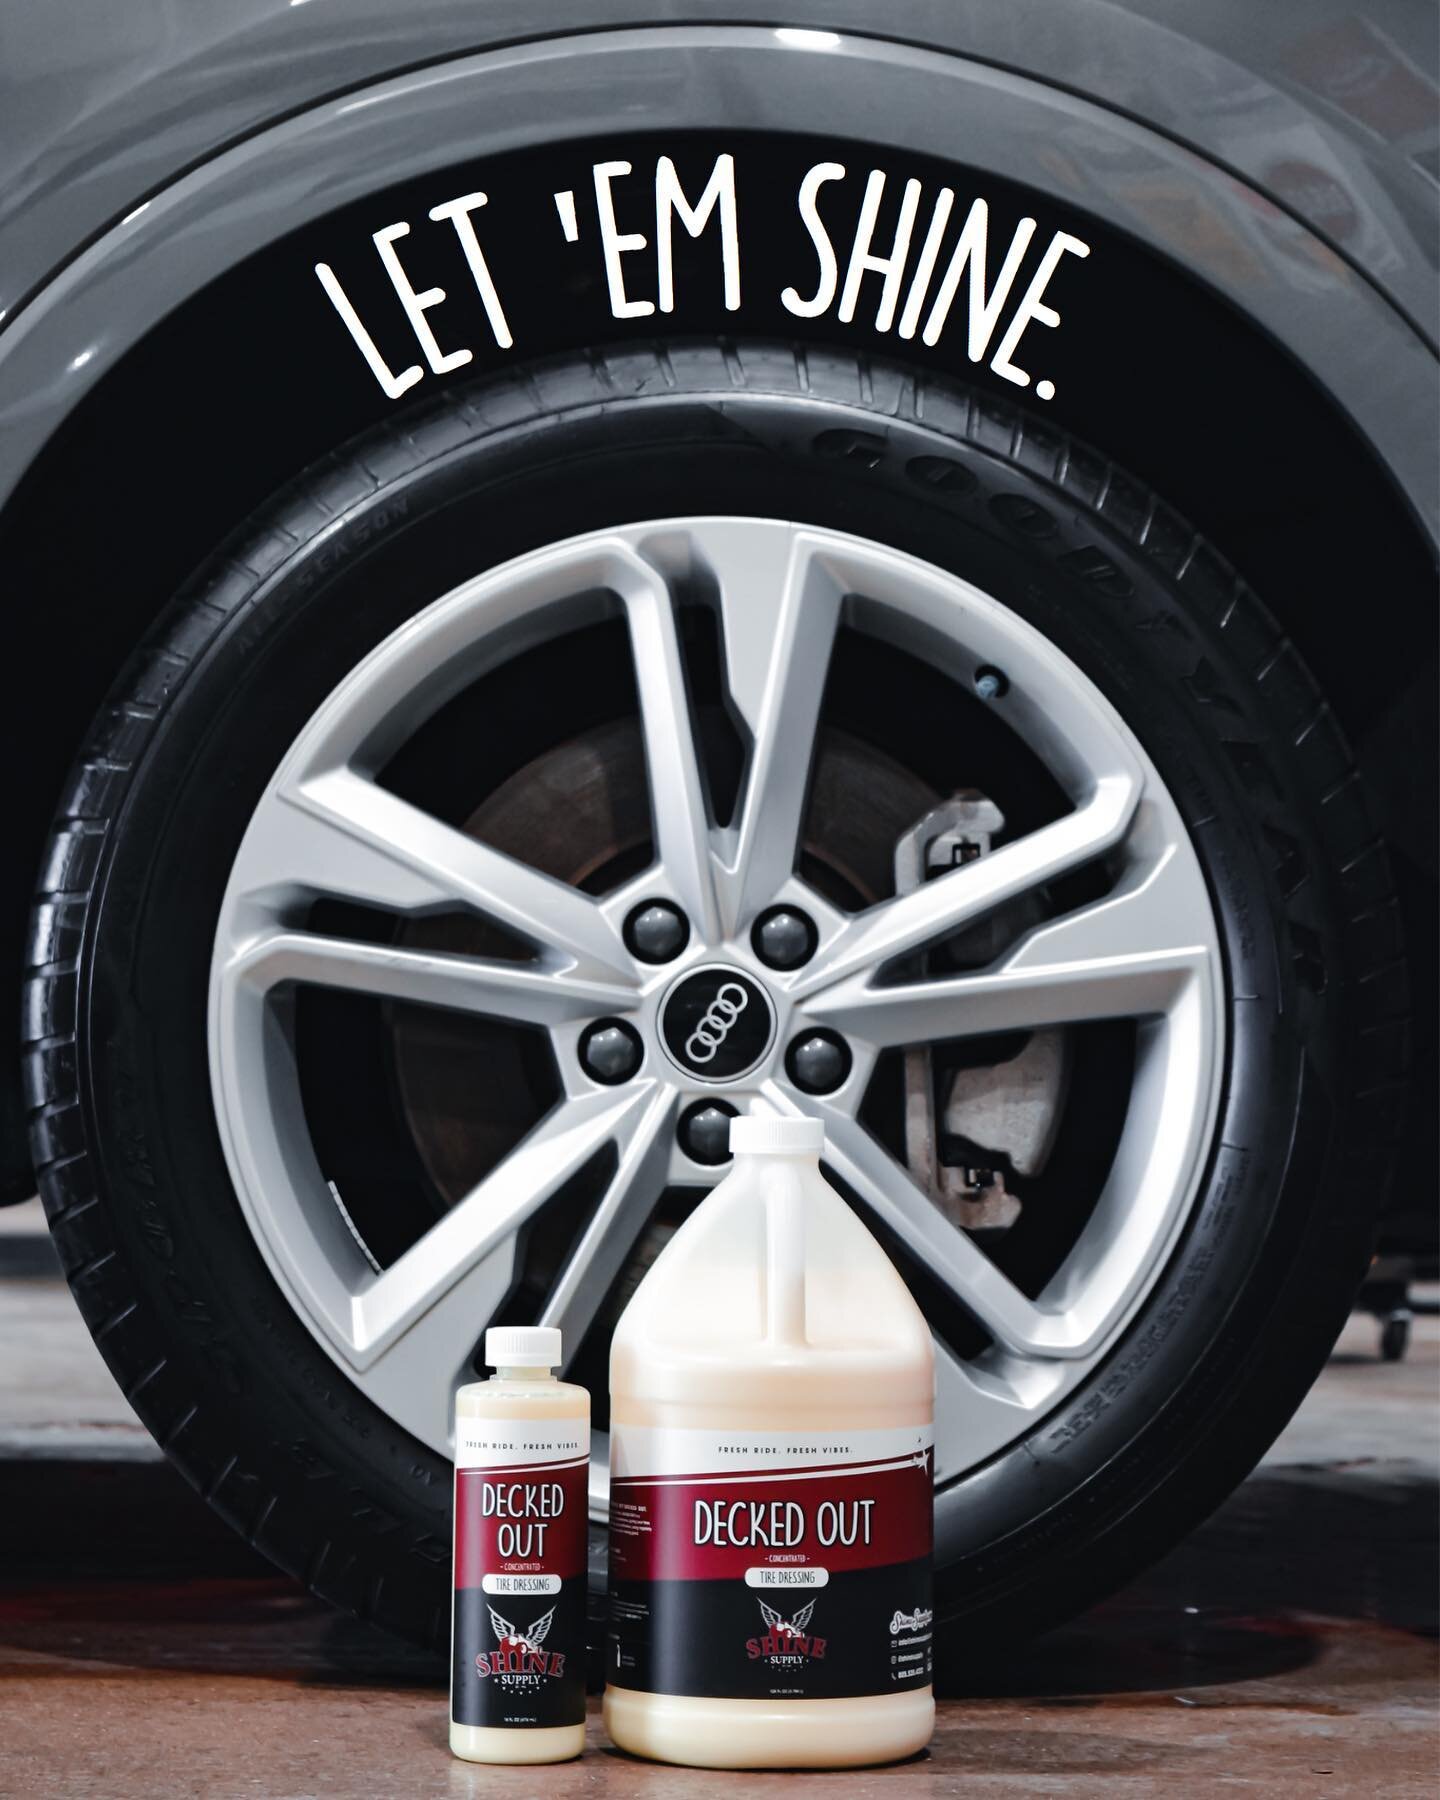 Decked Out is the last tire dressing you&rsquo;ll ever buy. The product can be diluted for either a shiny or matte finish, depending on your taste. No sling, no grease, just shine. Available in gallon or 16 OZ!
.
.
.
📞 801-900-3011
🕘 Retail is open